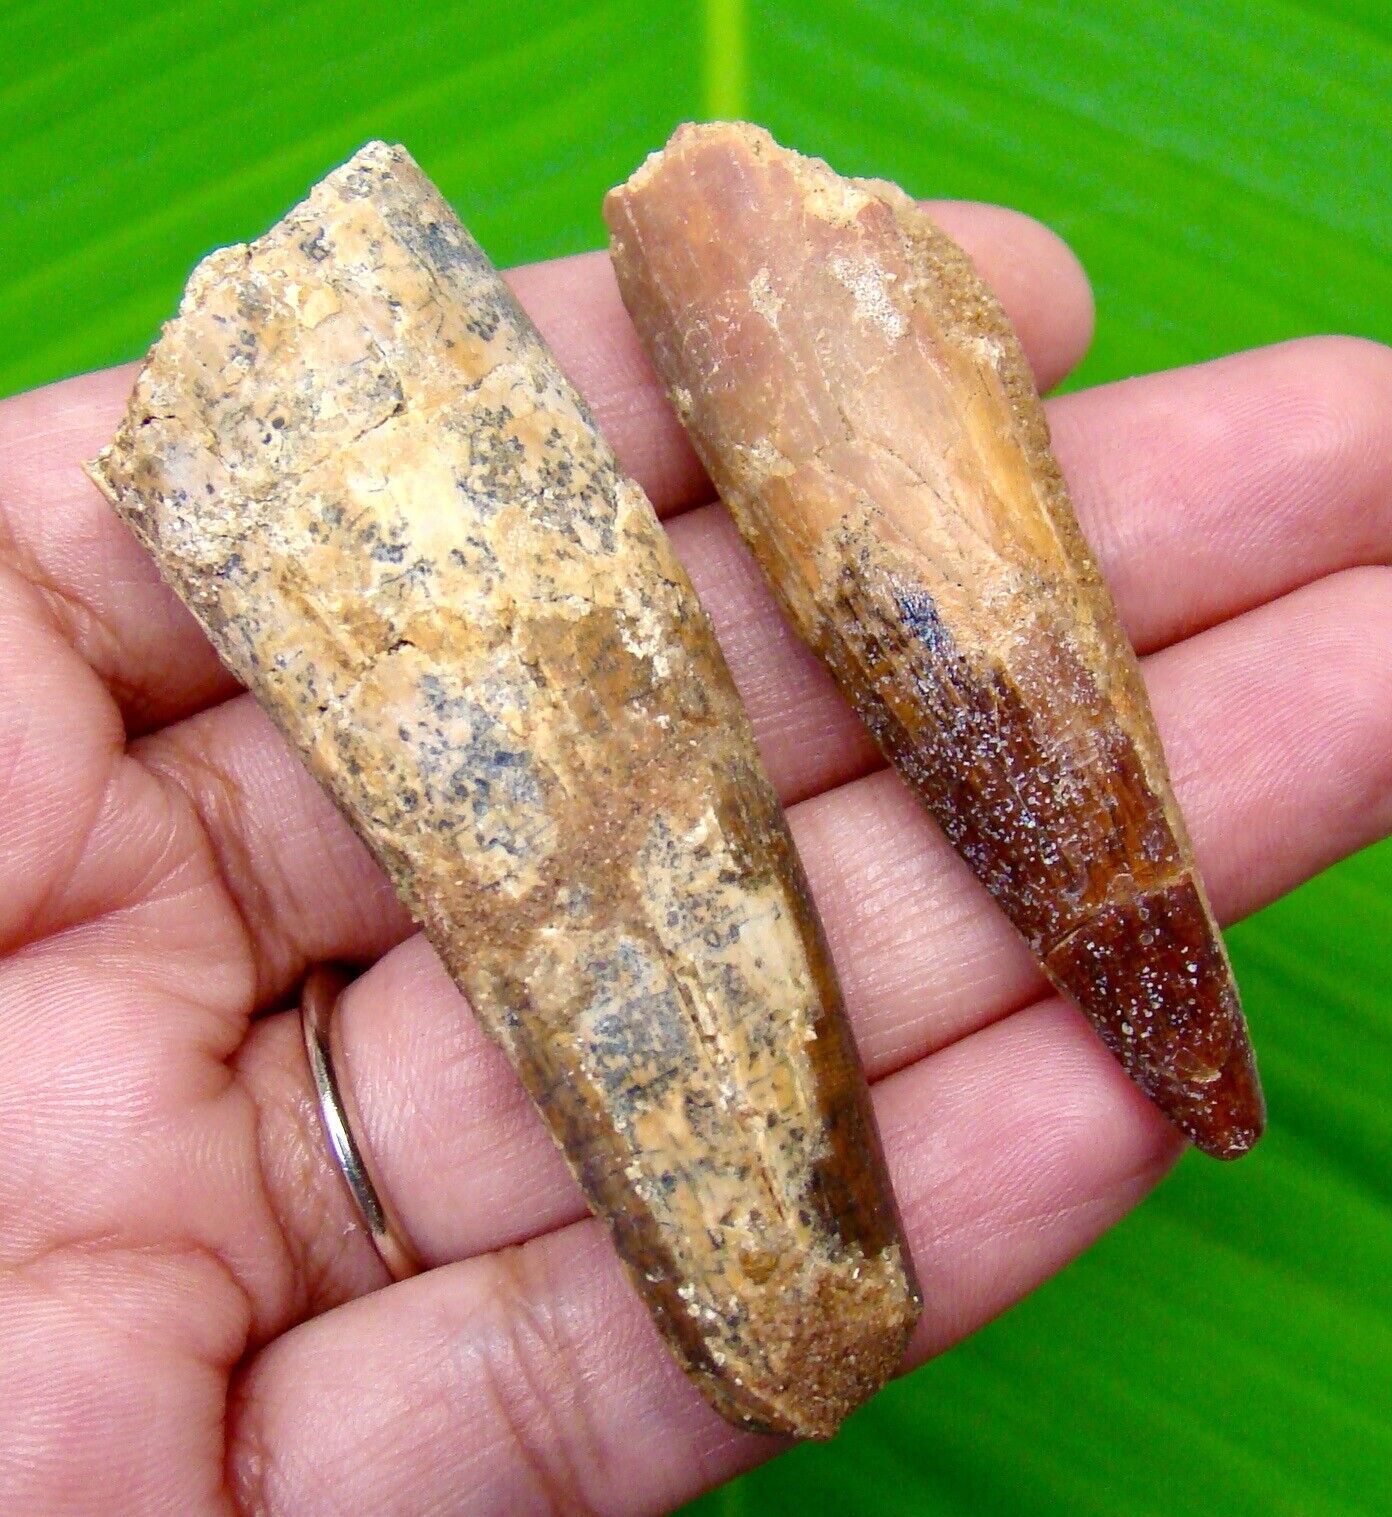 SPINOSAURUS DINOSAUR TOOTH - 2.49” & 2.18 INCHES - TWO REAL FOSSIL 